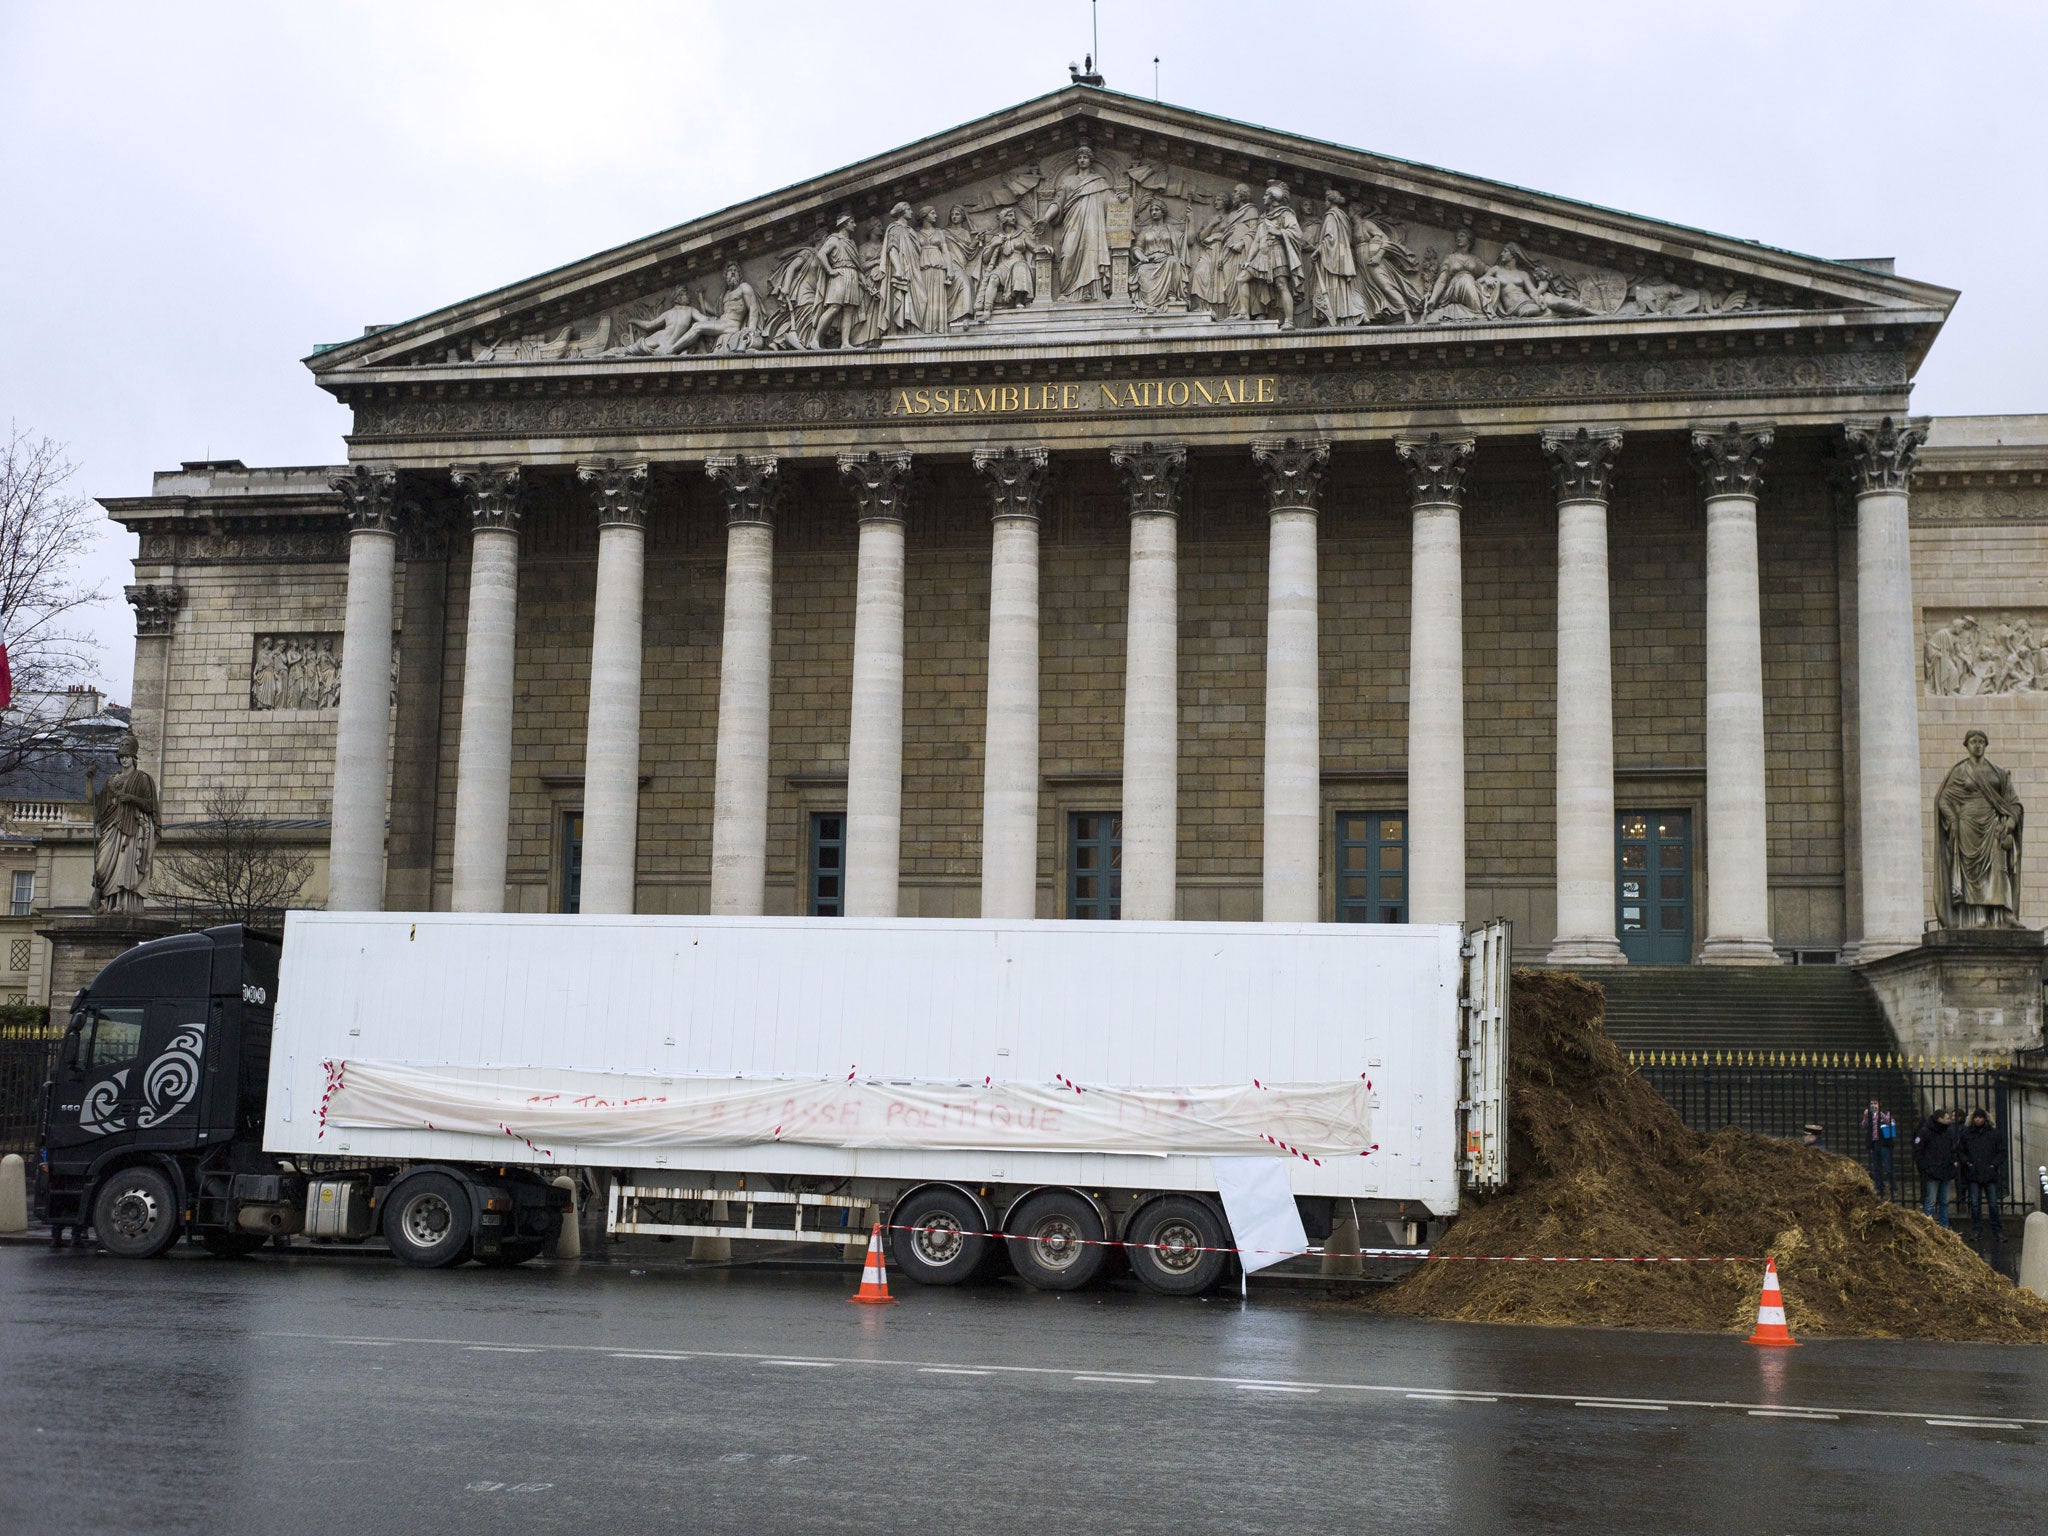 This truck dumped manure outside of the French National Assembly